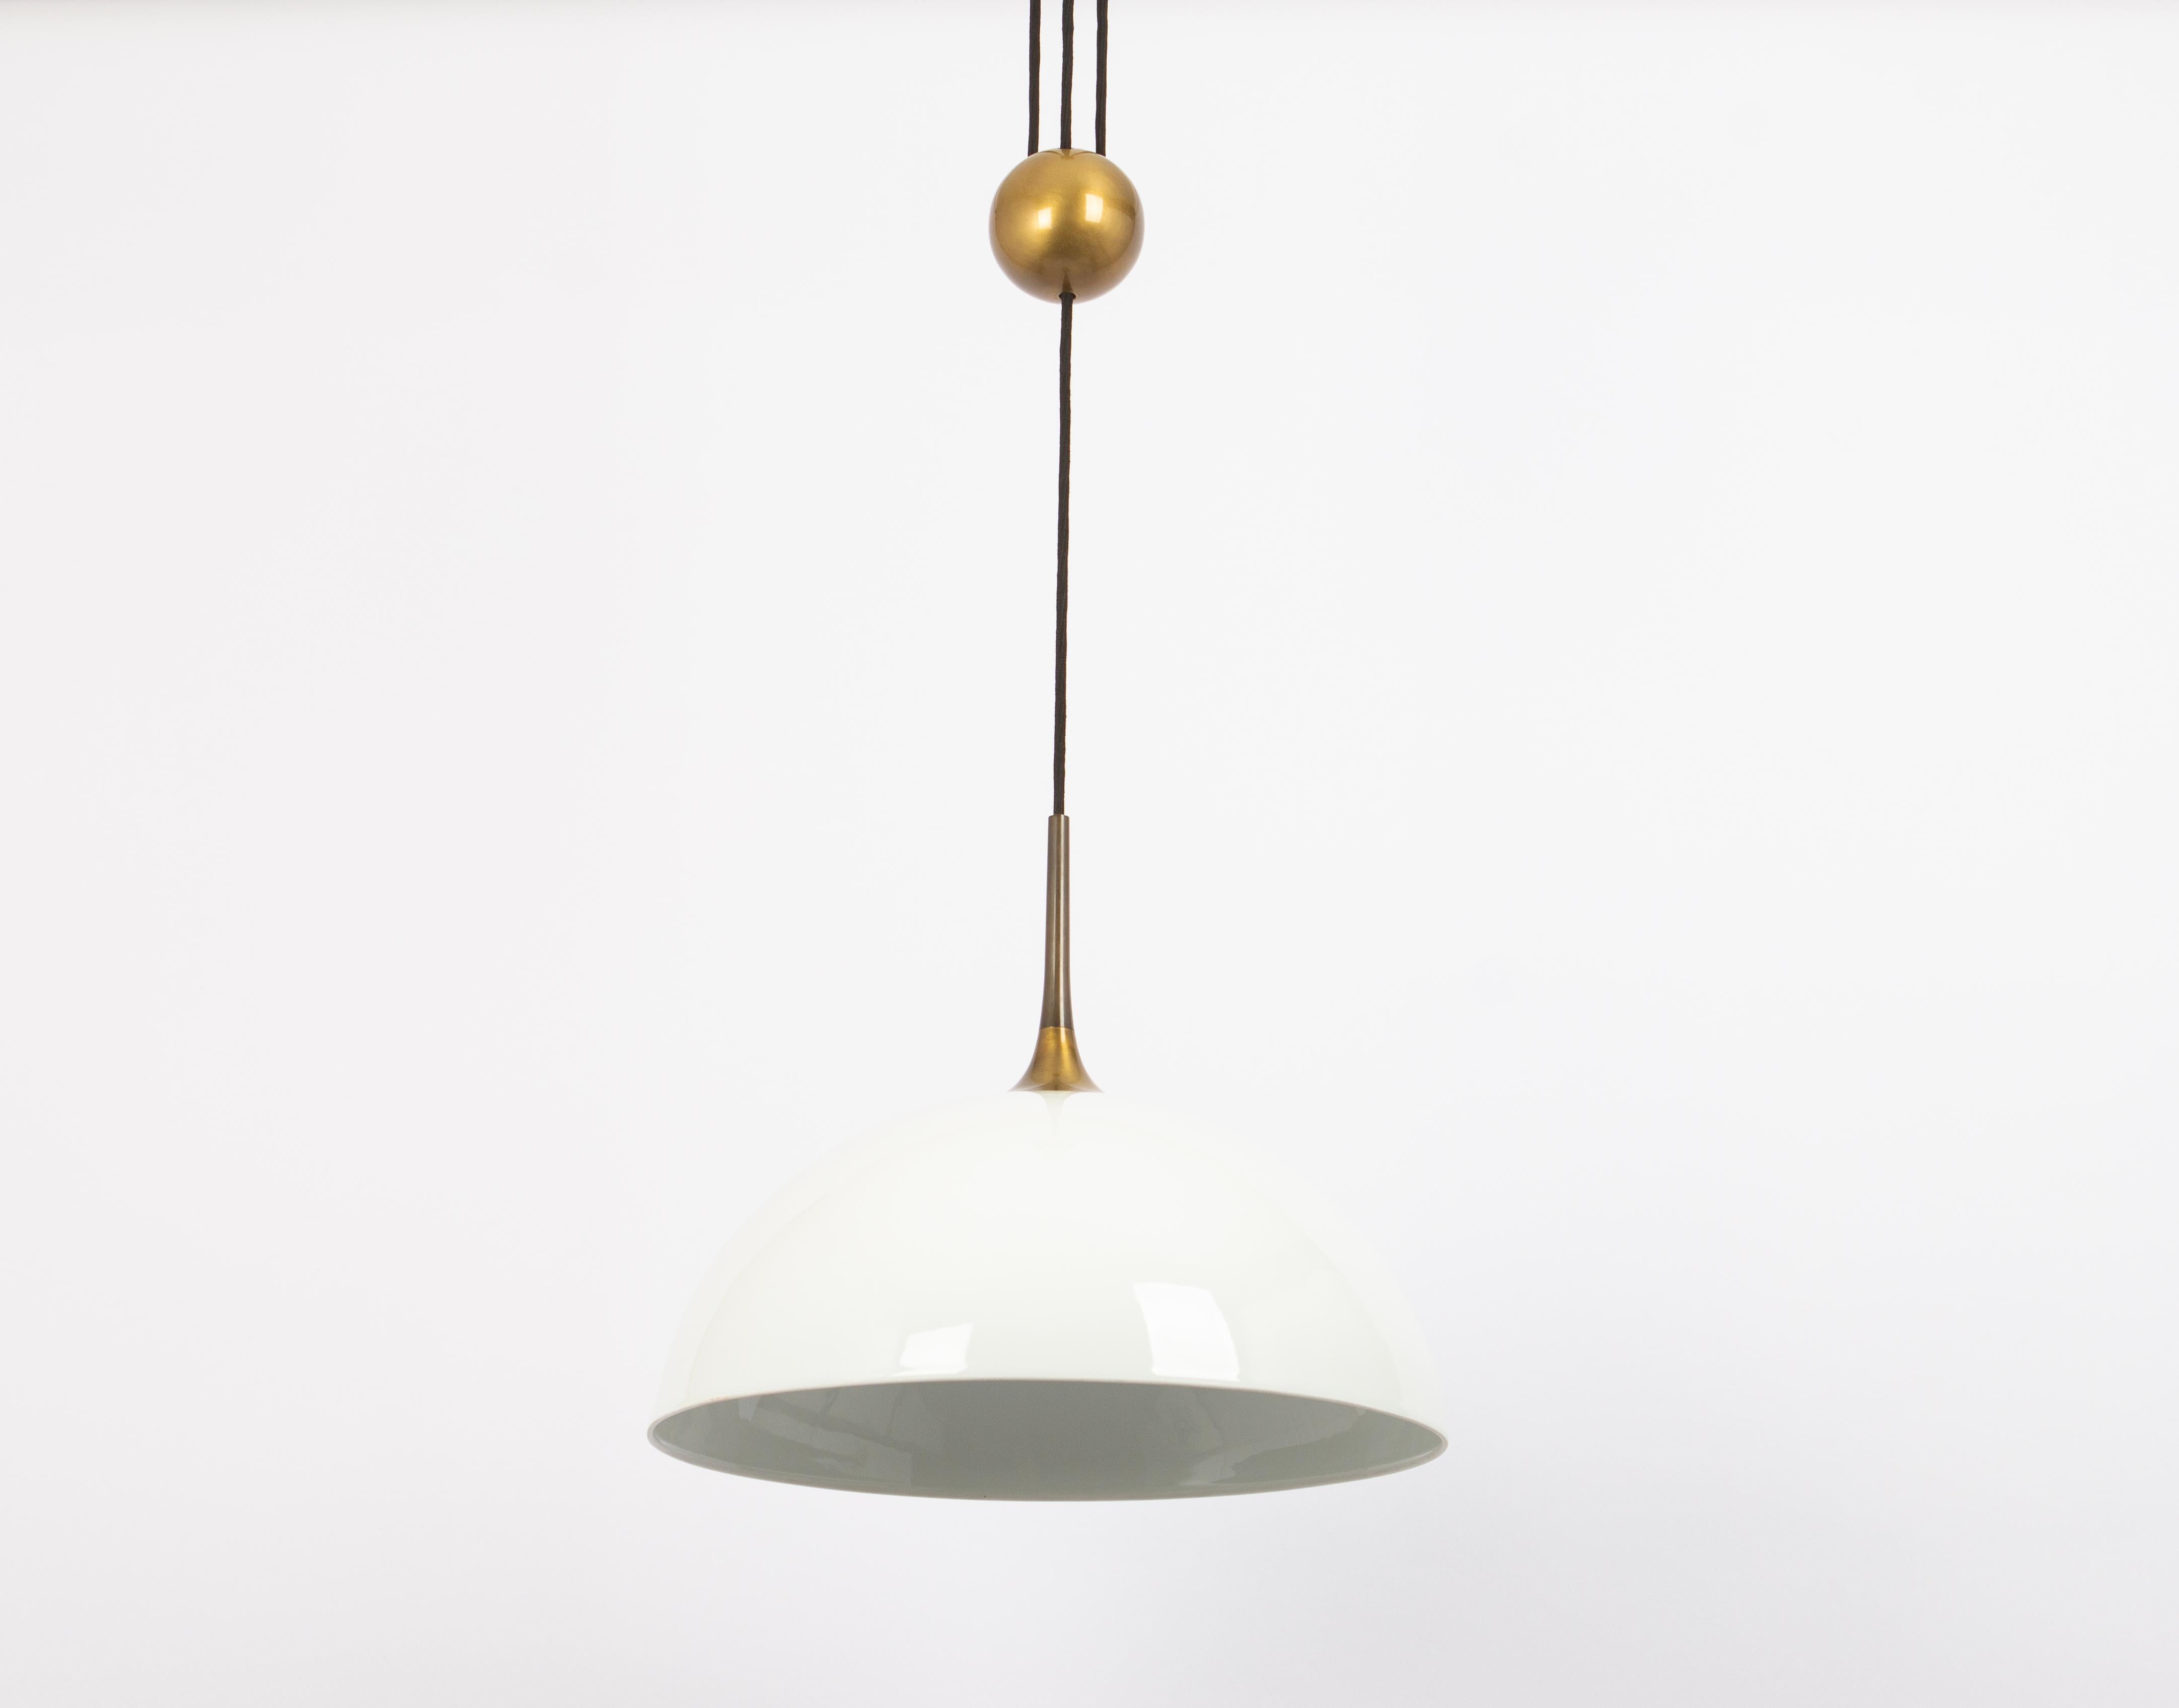 Large adjustable dark brass counterweight pendant light designed by Florian Schulz, Germany, 1970s.
It is a masterpiece of design and craftsmanship. It seamlessly blends functionality and aesthetics to create a lighting fixture that's as much an art